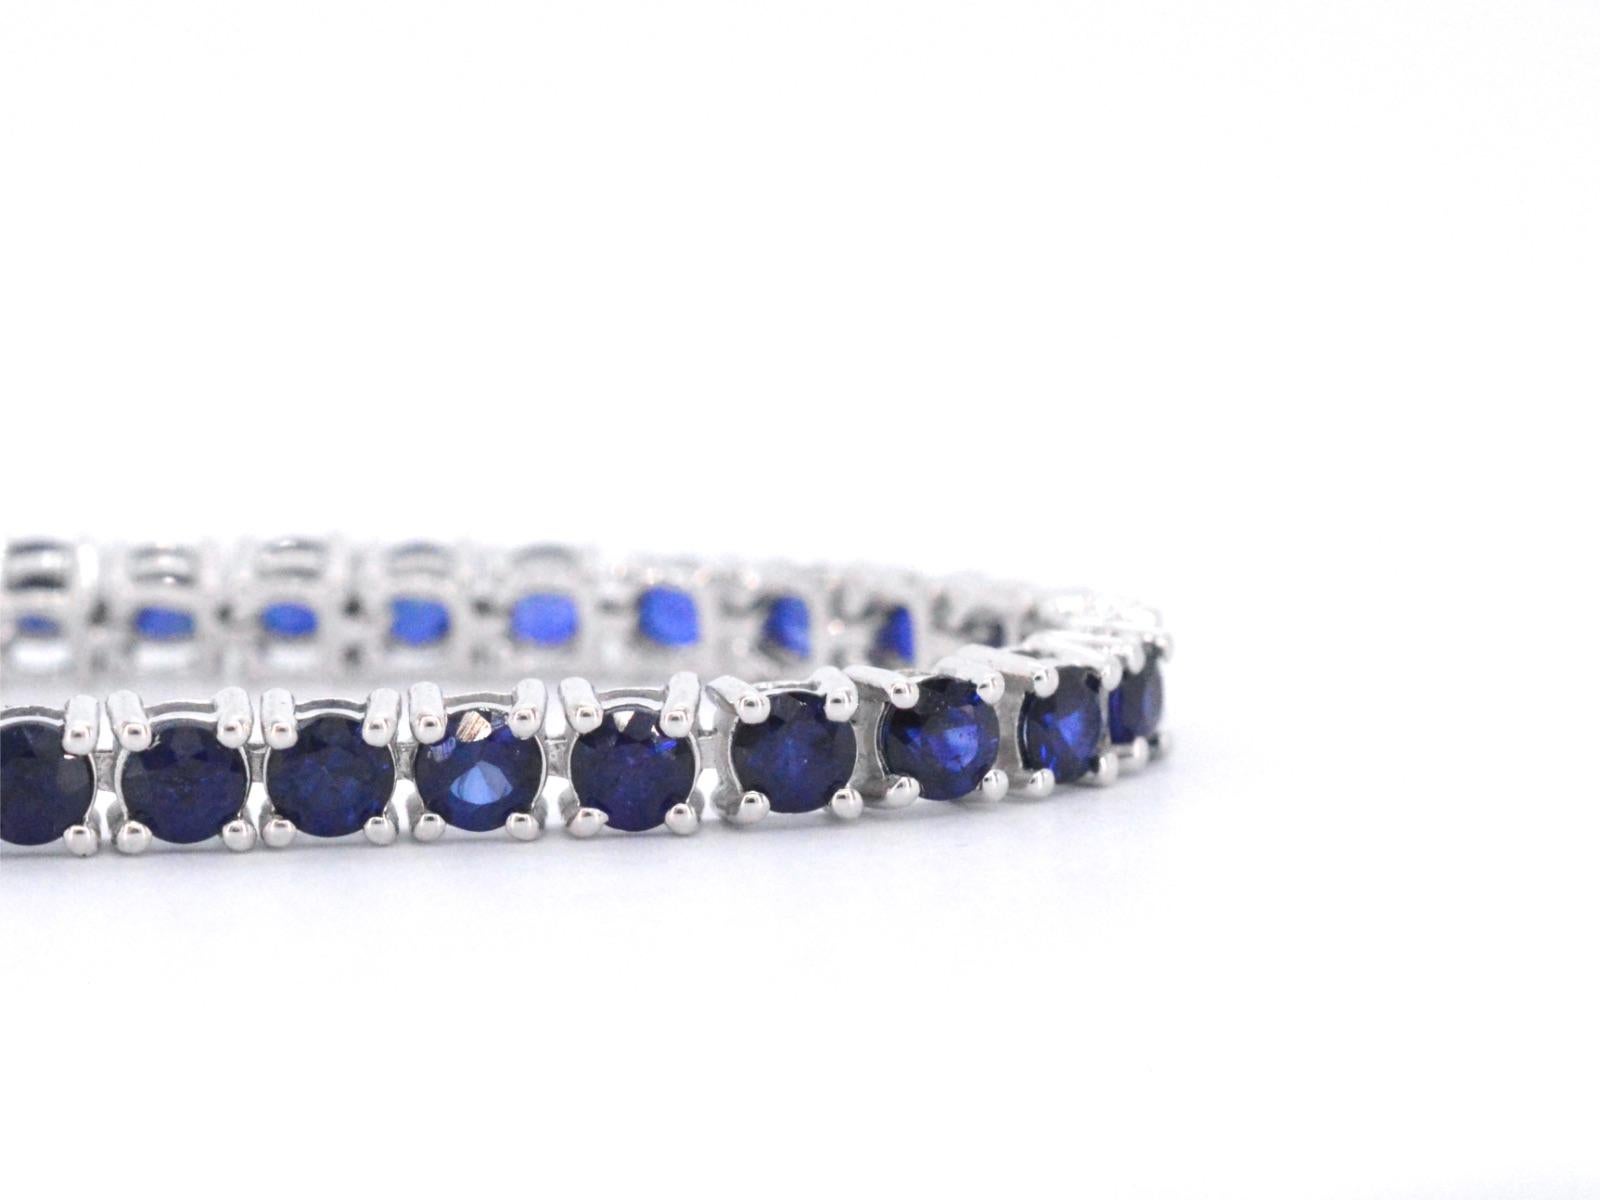 Women's White Gold Tennis Bracelet with Sapphires For Sale